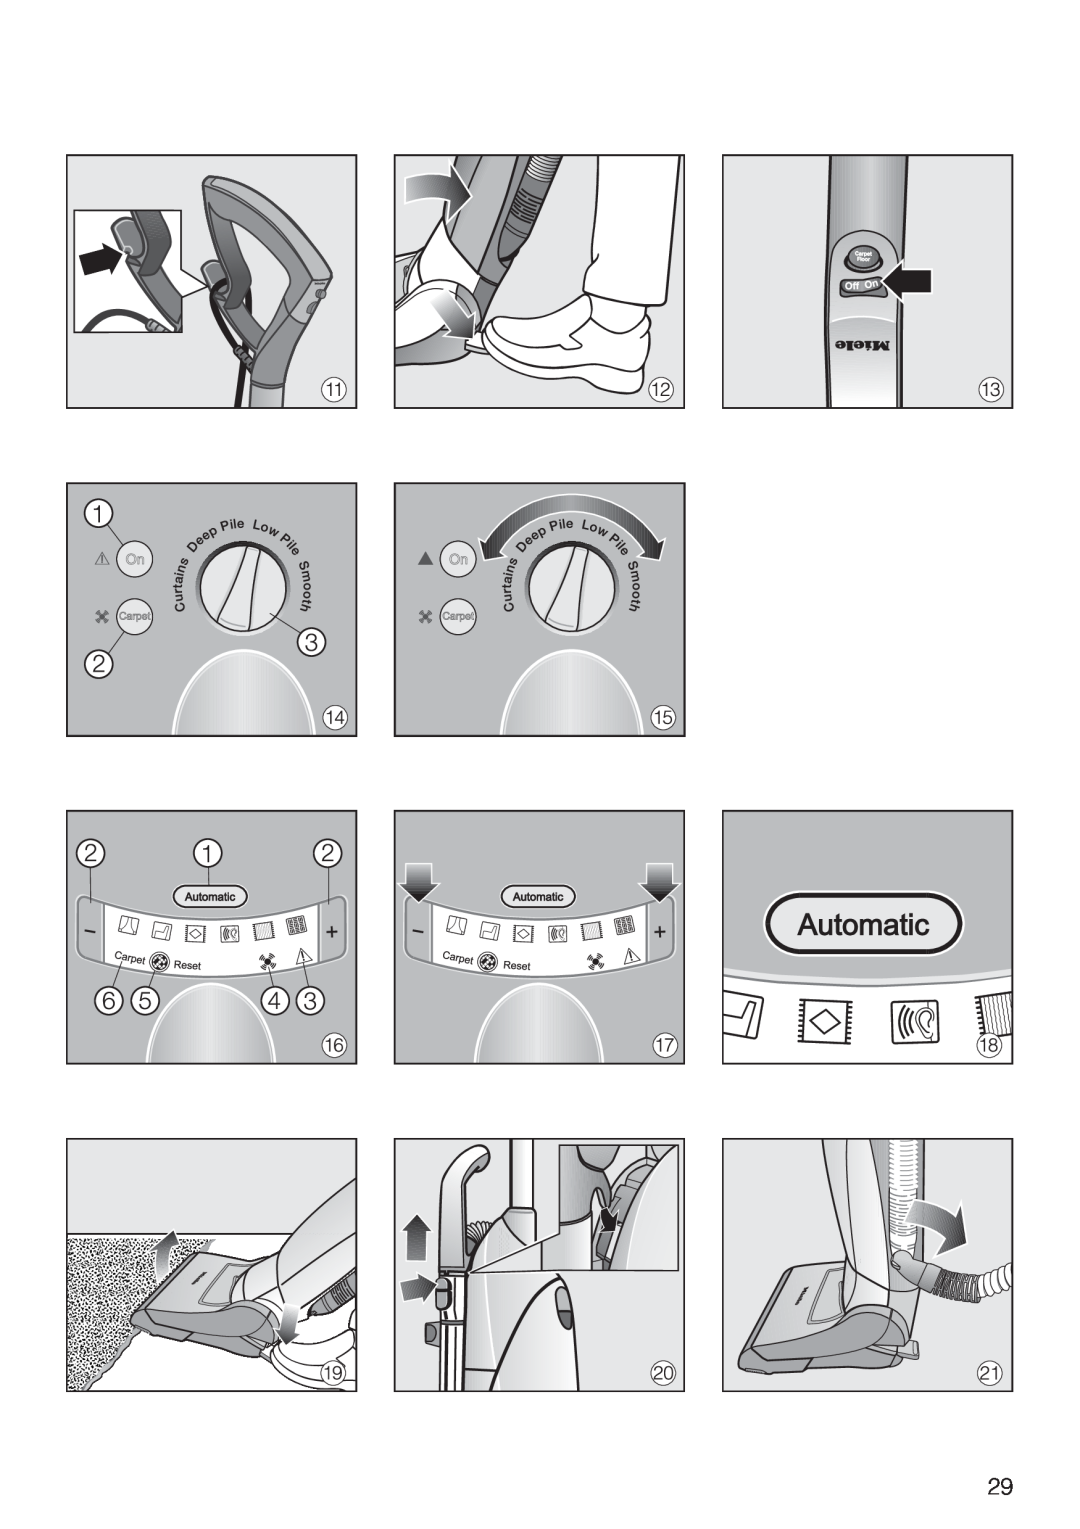 Miele M-NR09753 090, HS08 operating instructions 